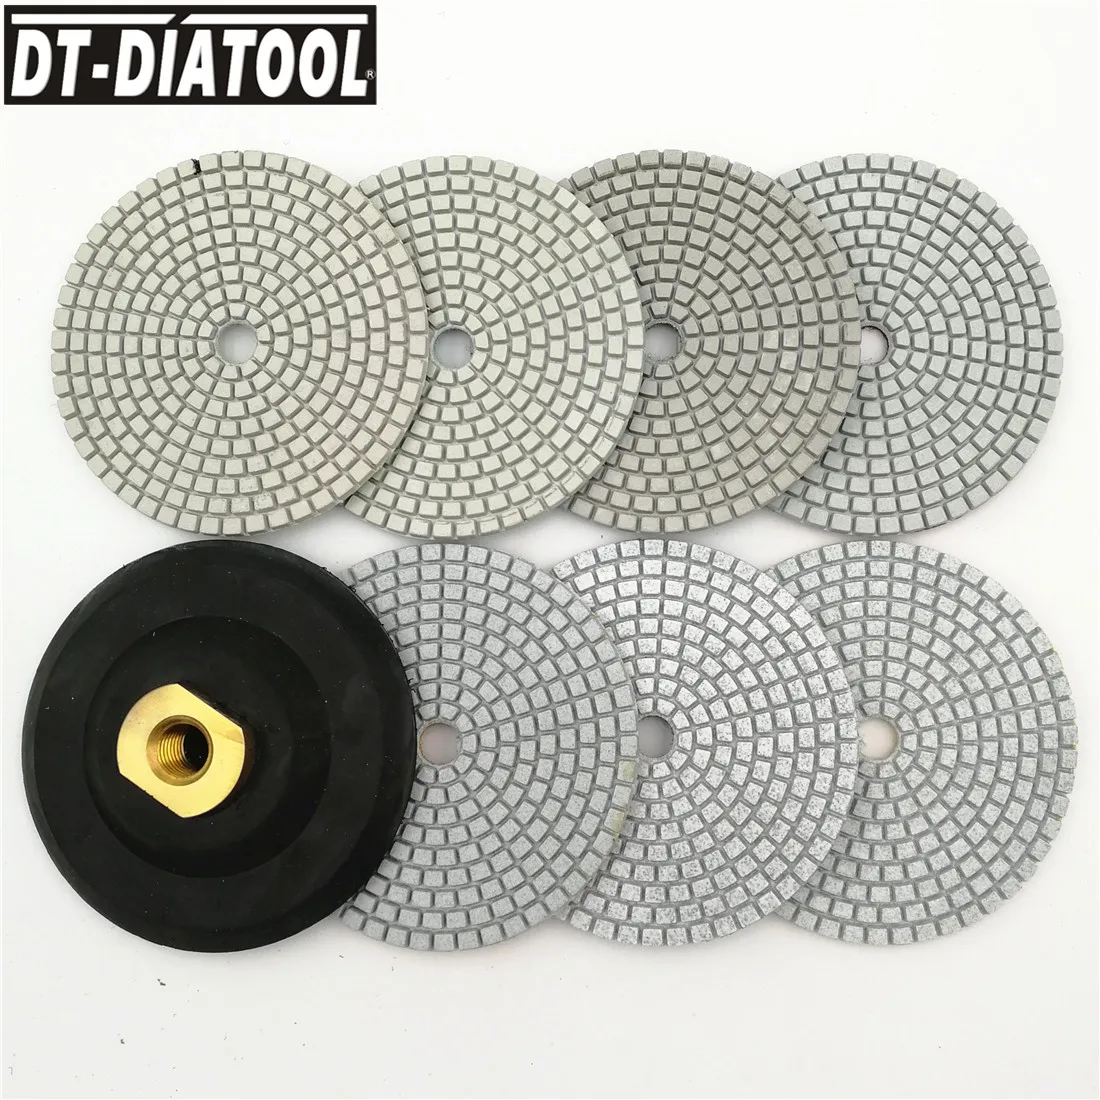 

DT-DIATOOL 7pcs/set 100mm/4" Diamond Sanding Disc Wet or Dry Polishing Pads with M14 Thread Backer For Natural Artificial Stone